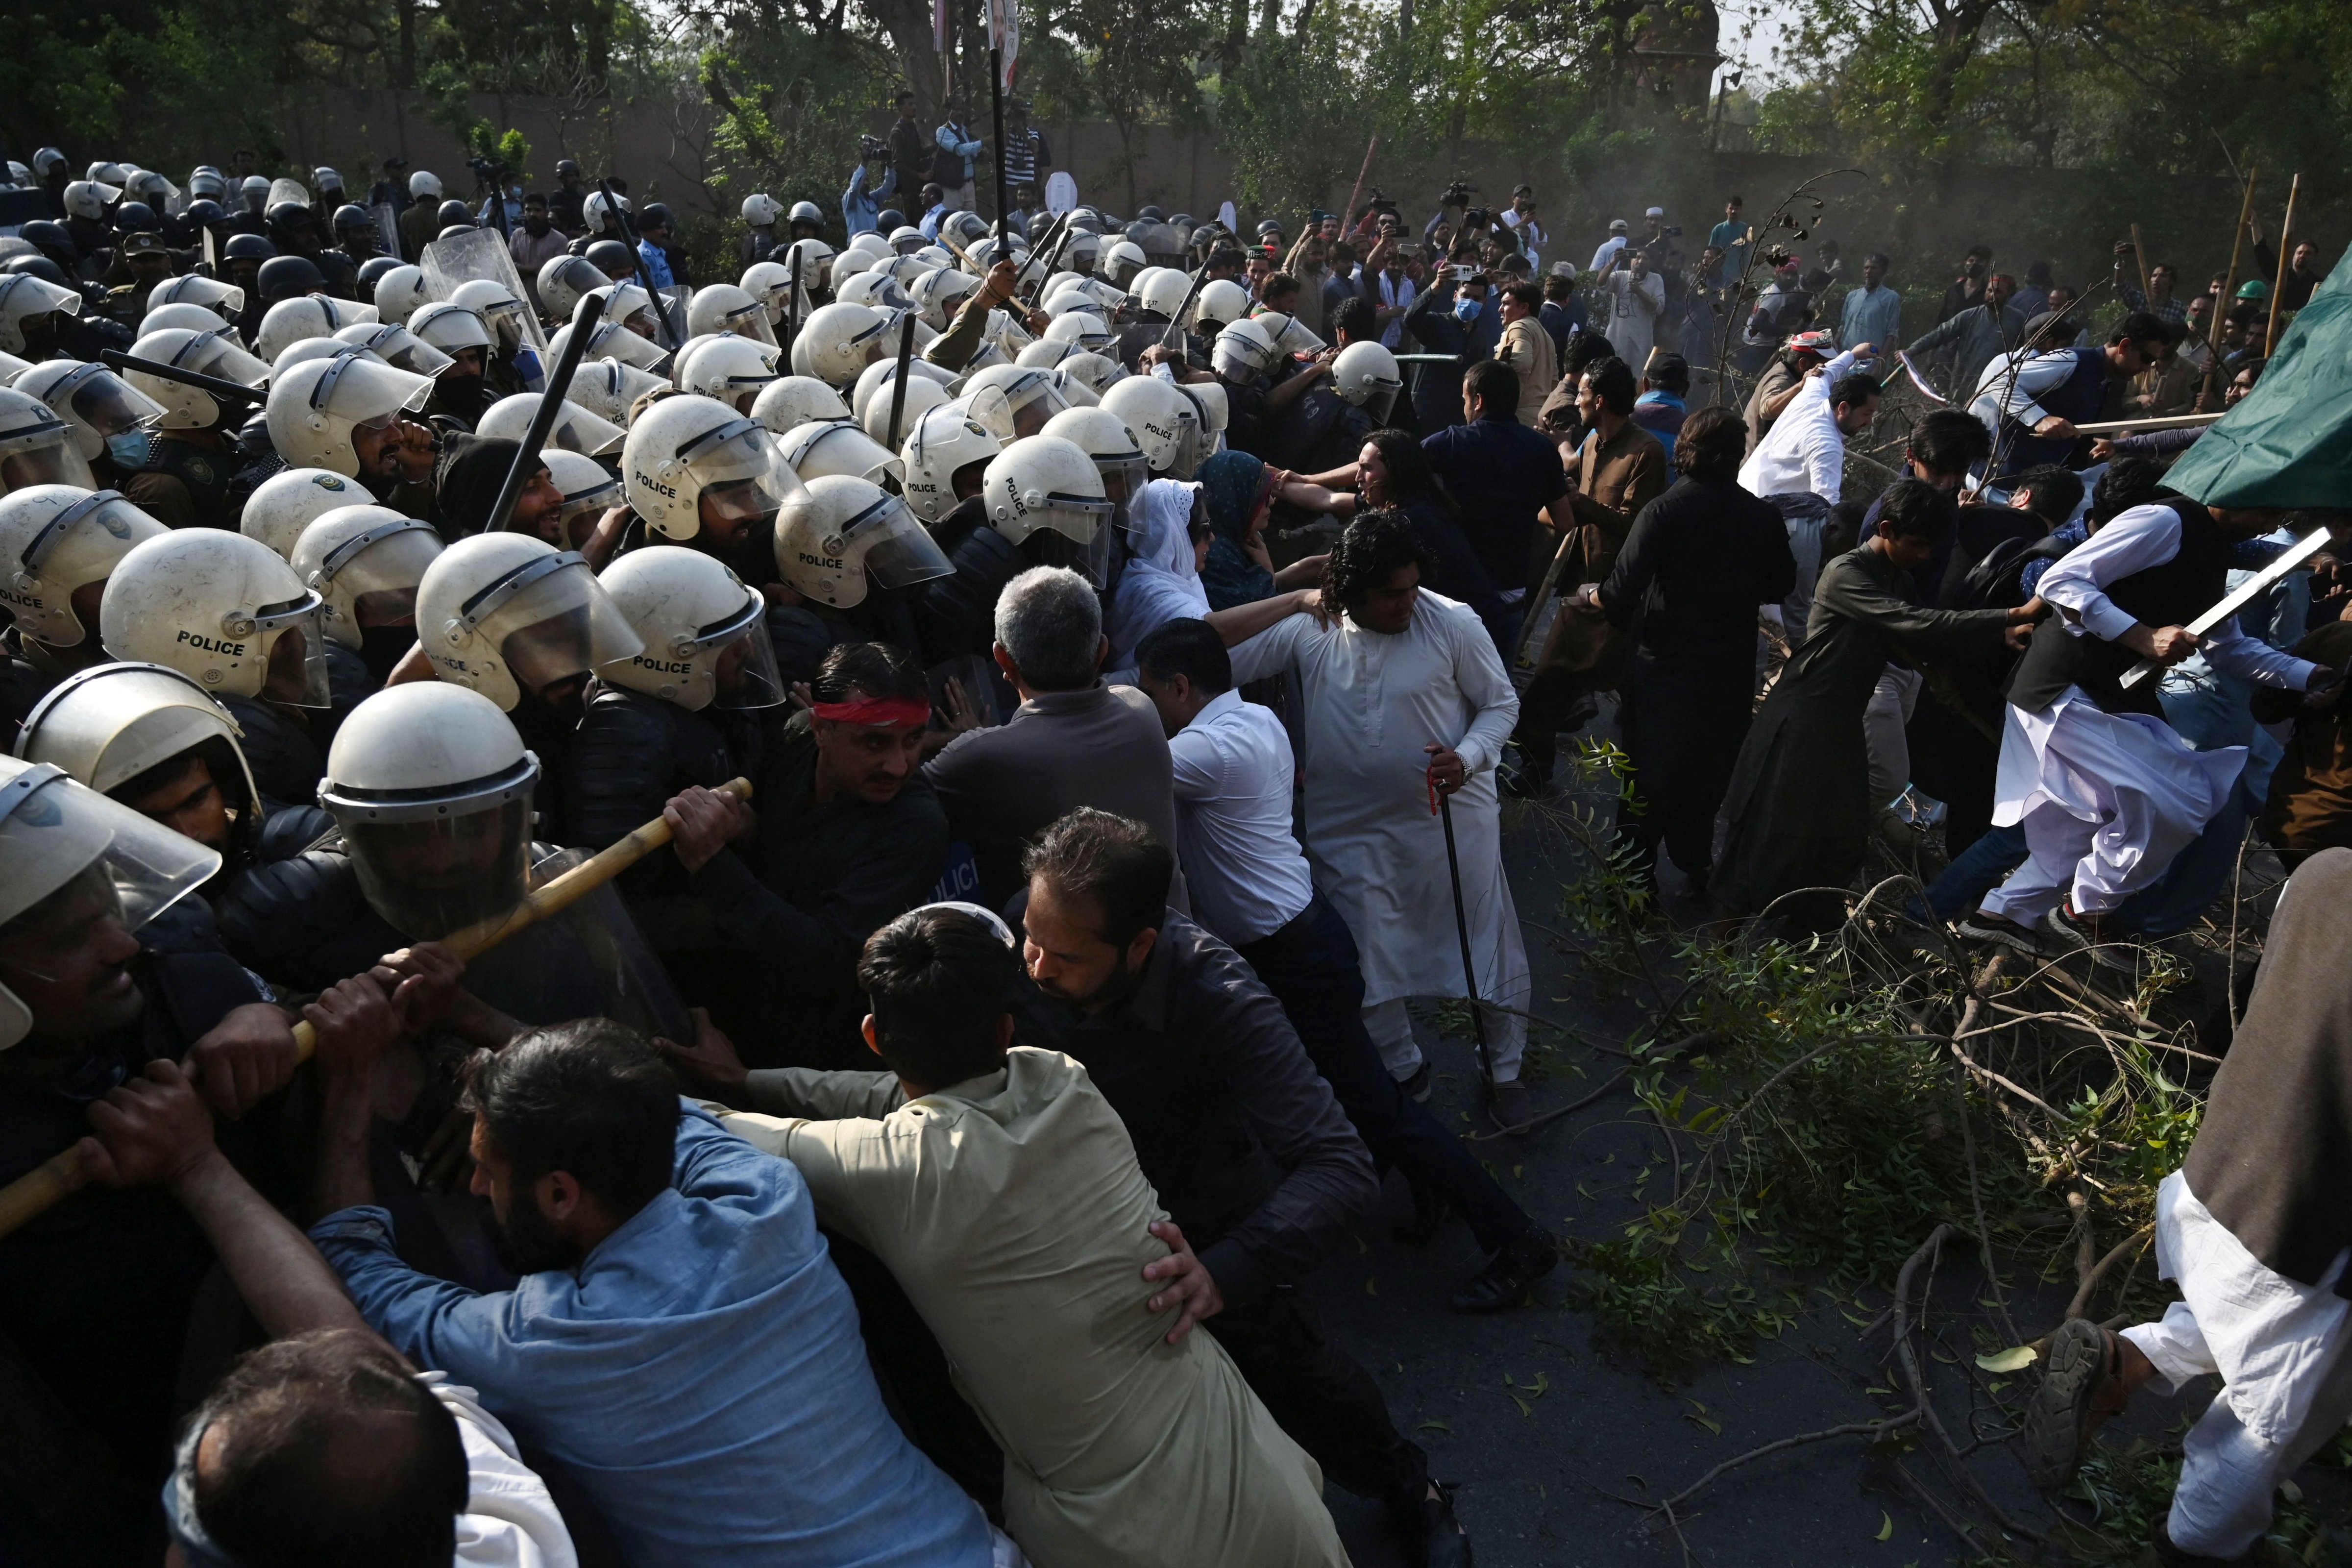 Riot police try to push back supporters of former prime minister Imran Khan gathered outside Khan's house to prevent officers from arresting him, in Lahore, Pakistan, March 14, 2023. (Arif Ali—AFP/Getty Images)